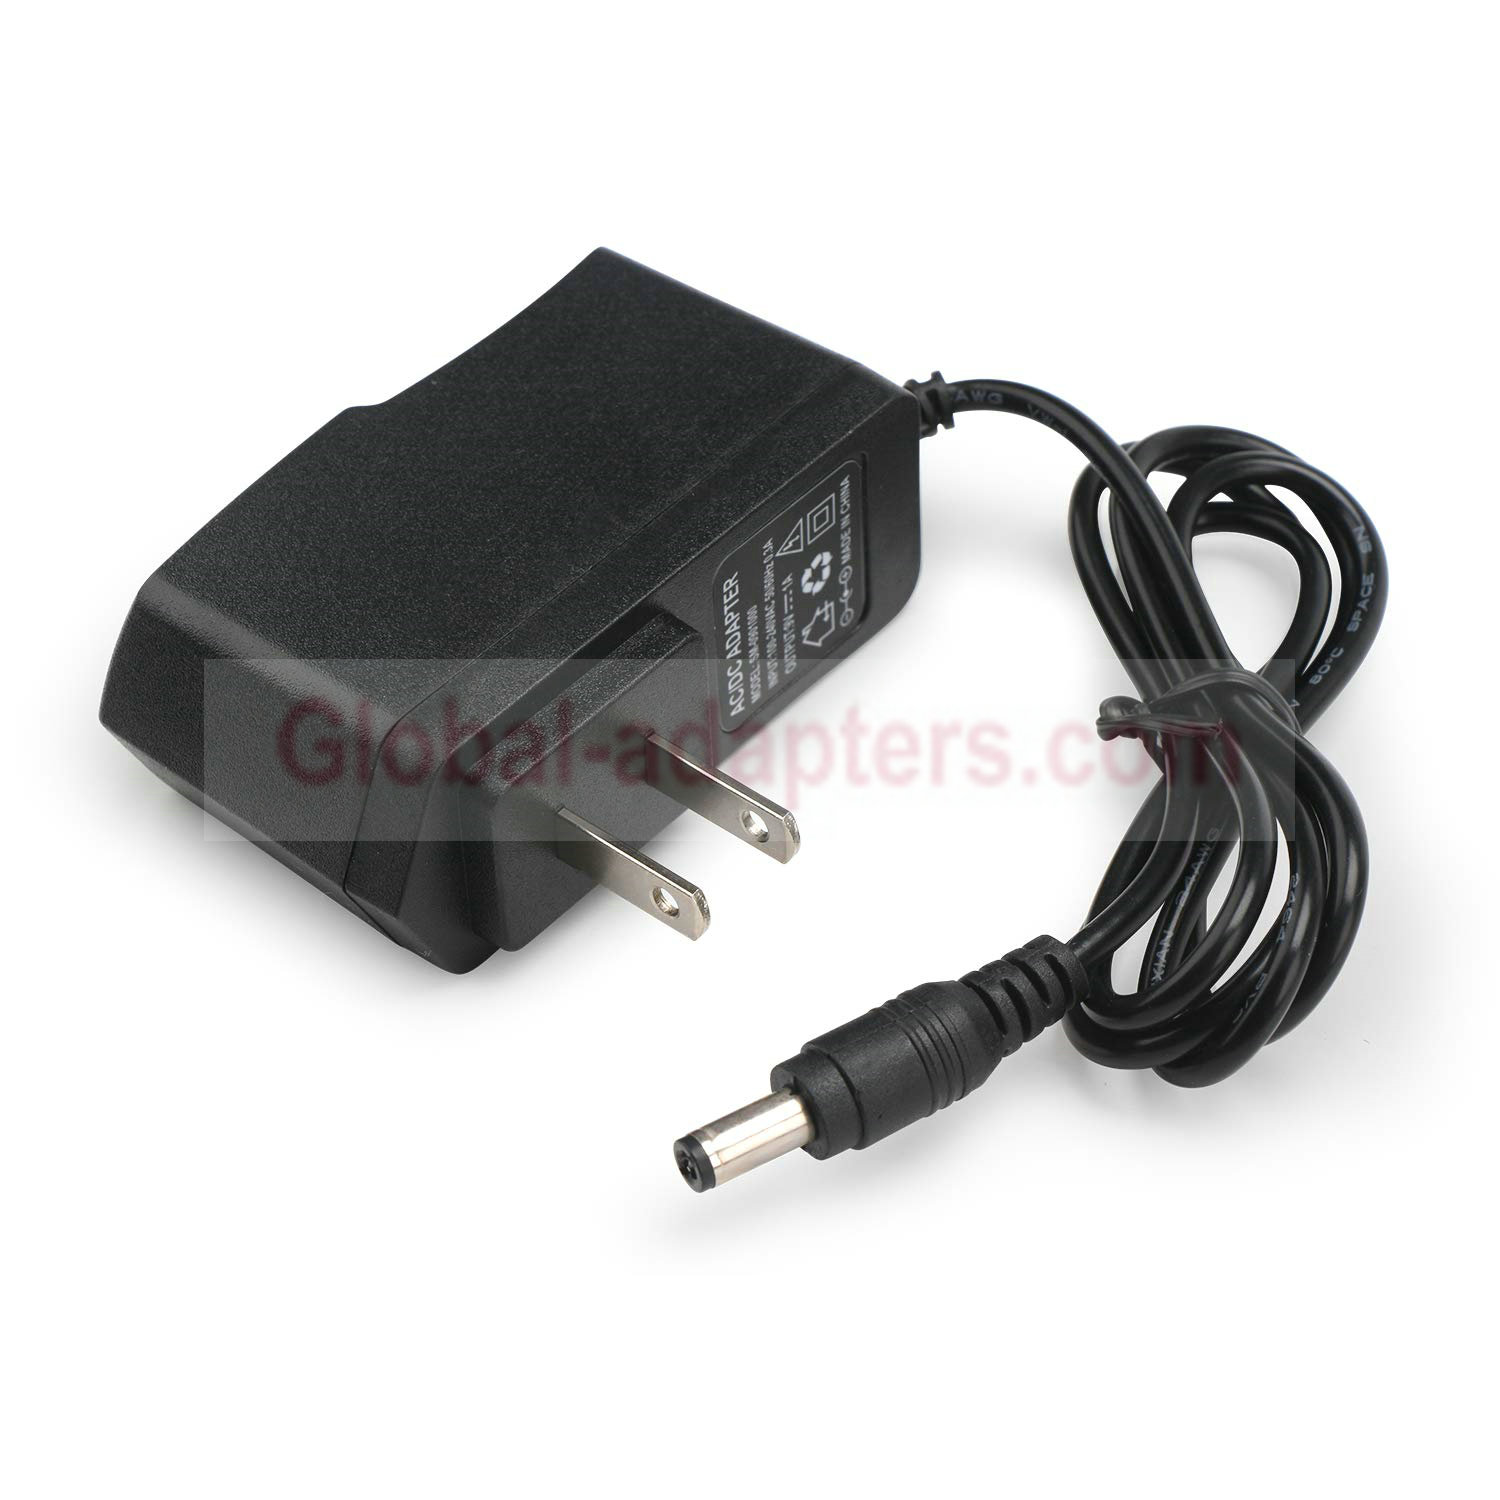 New 9V 1A DROK 091038 Power Supply Ac Adapter for ADSL Router Devices